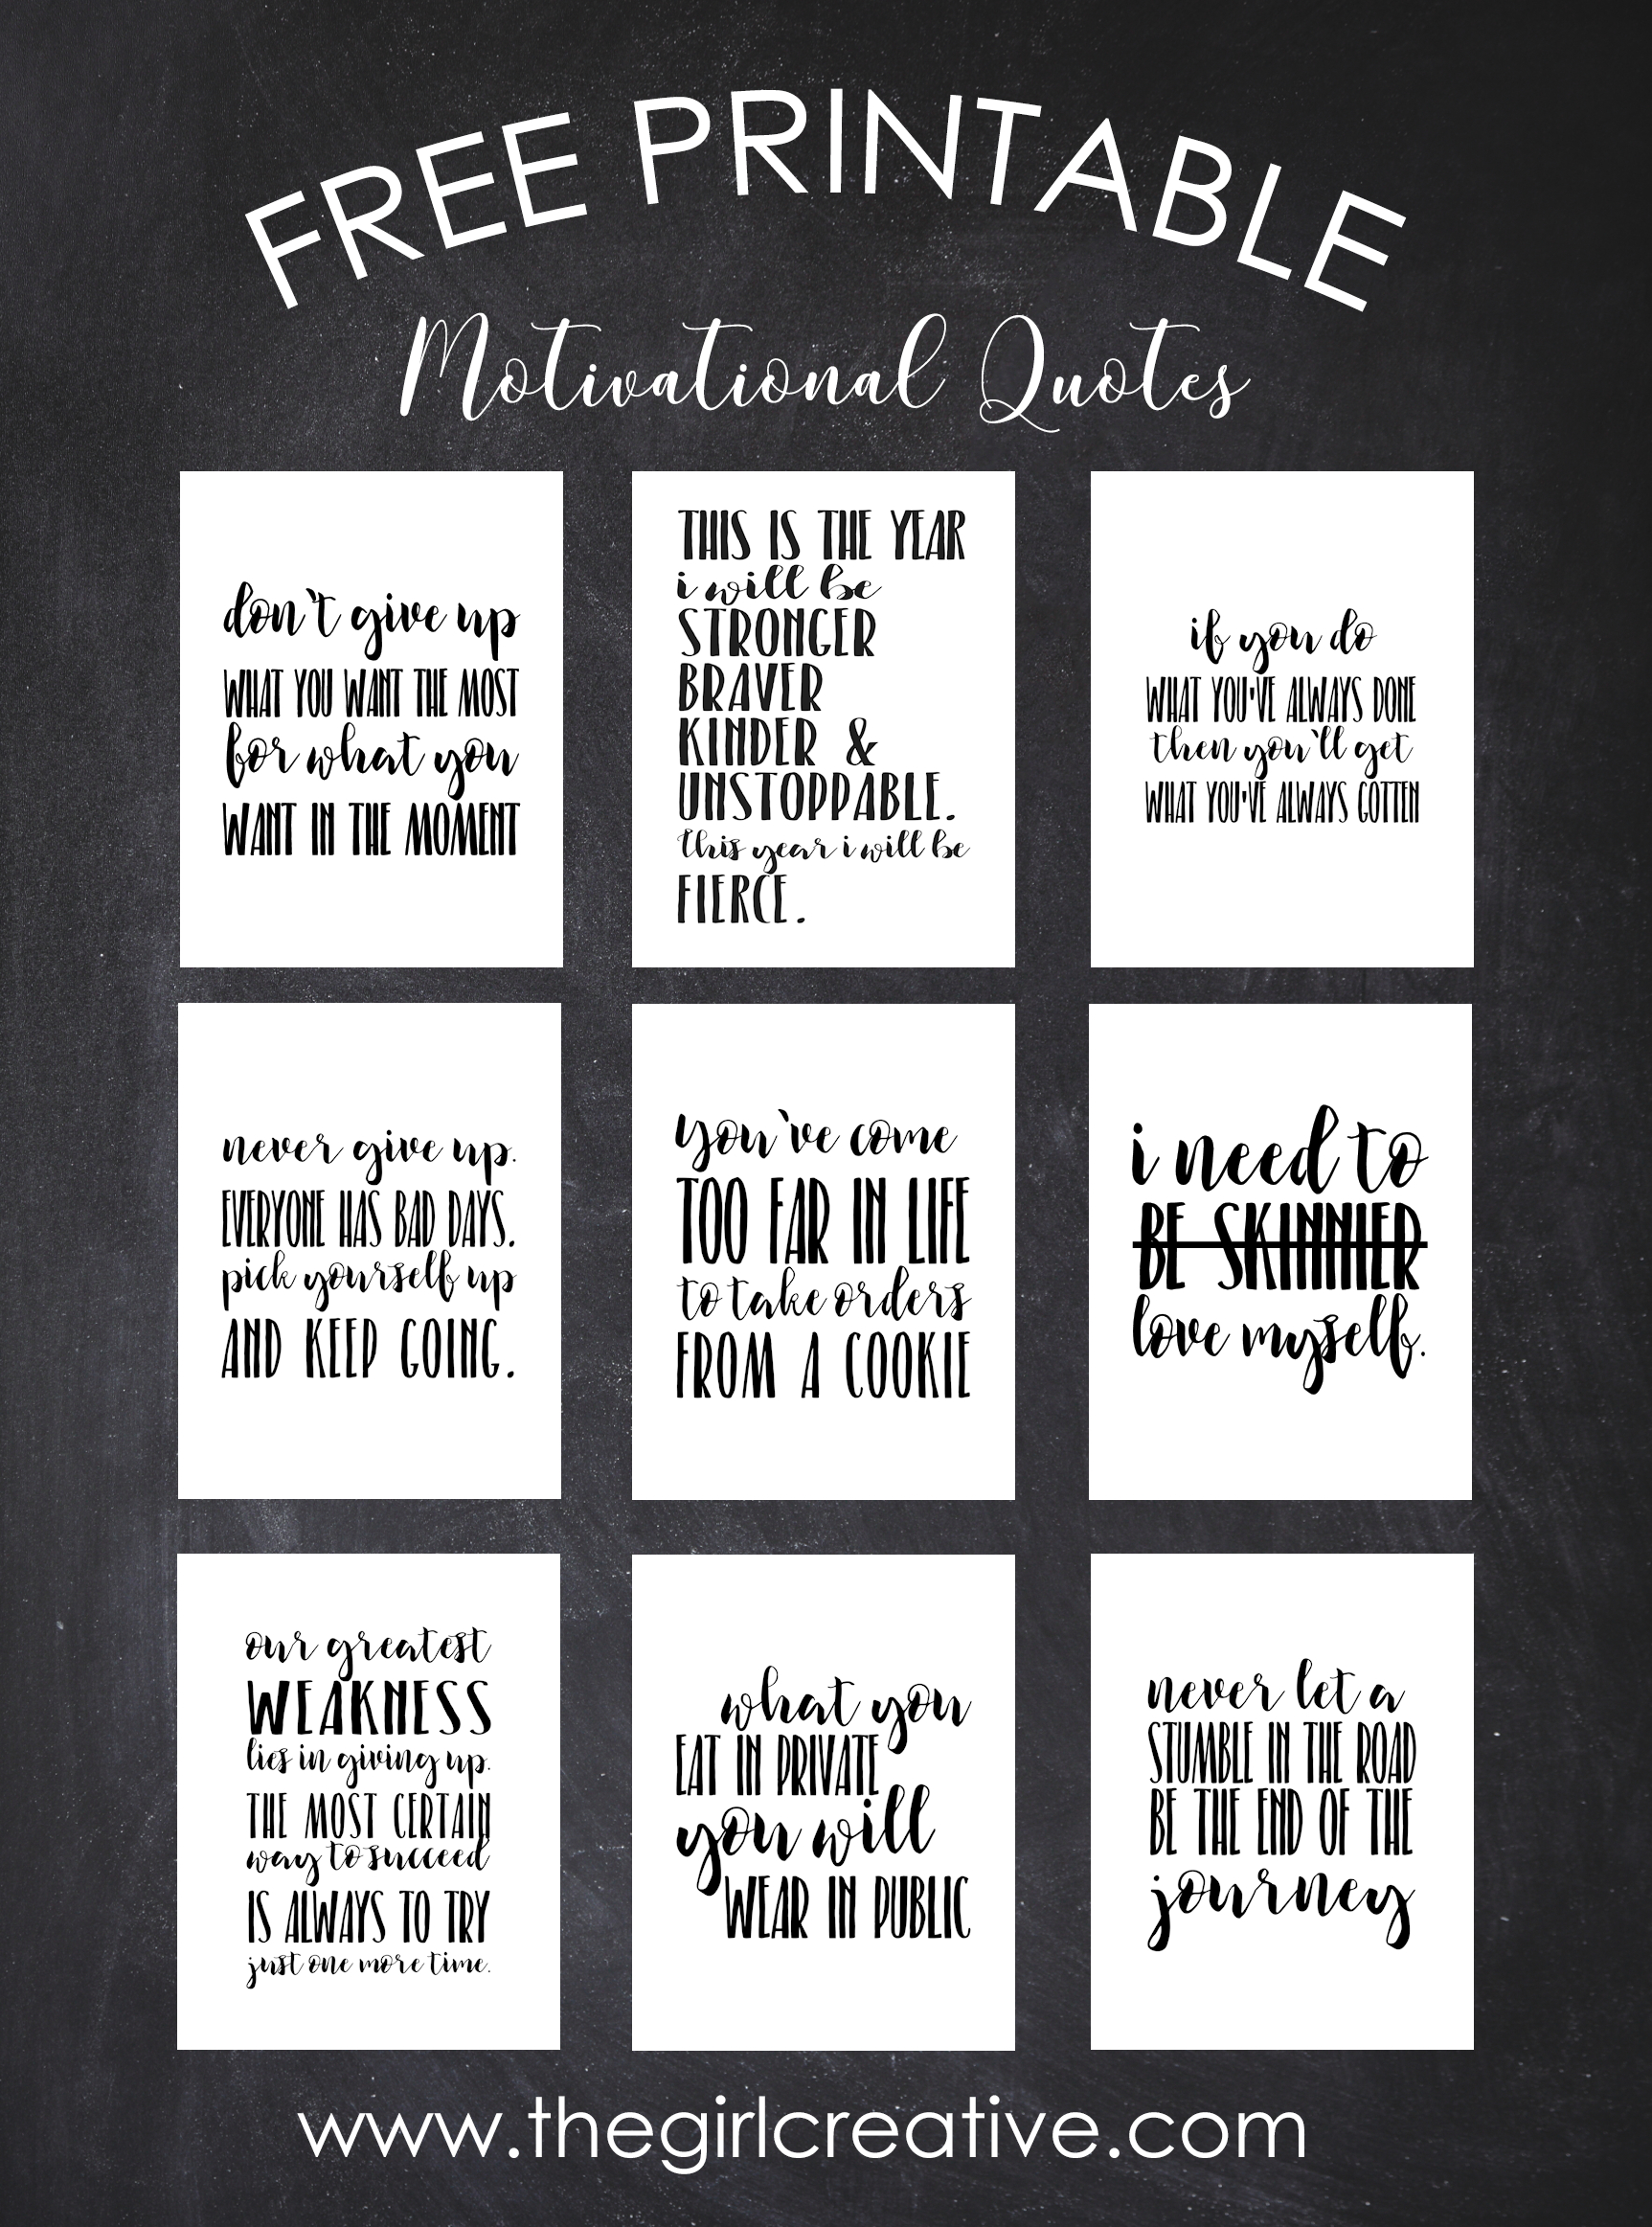 Free Printable Motivational Quotes - The Girl Creative - Free Printable Testing Signs